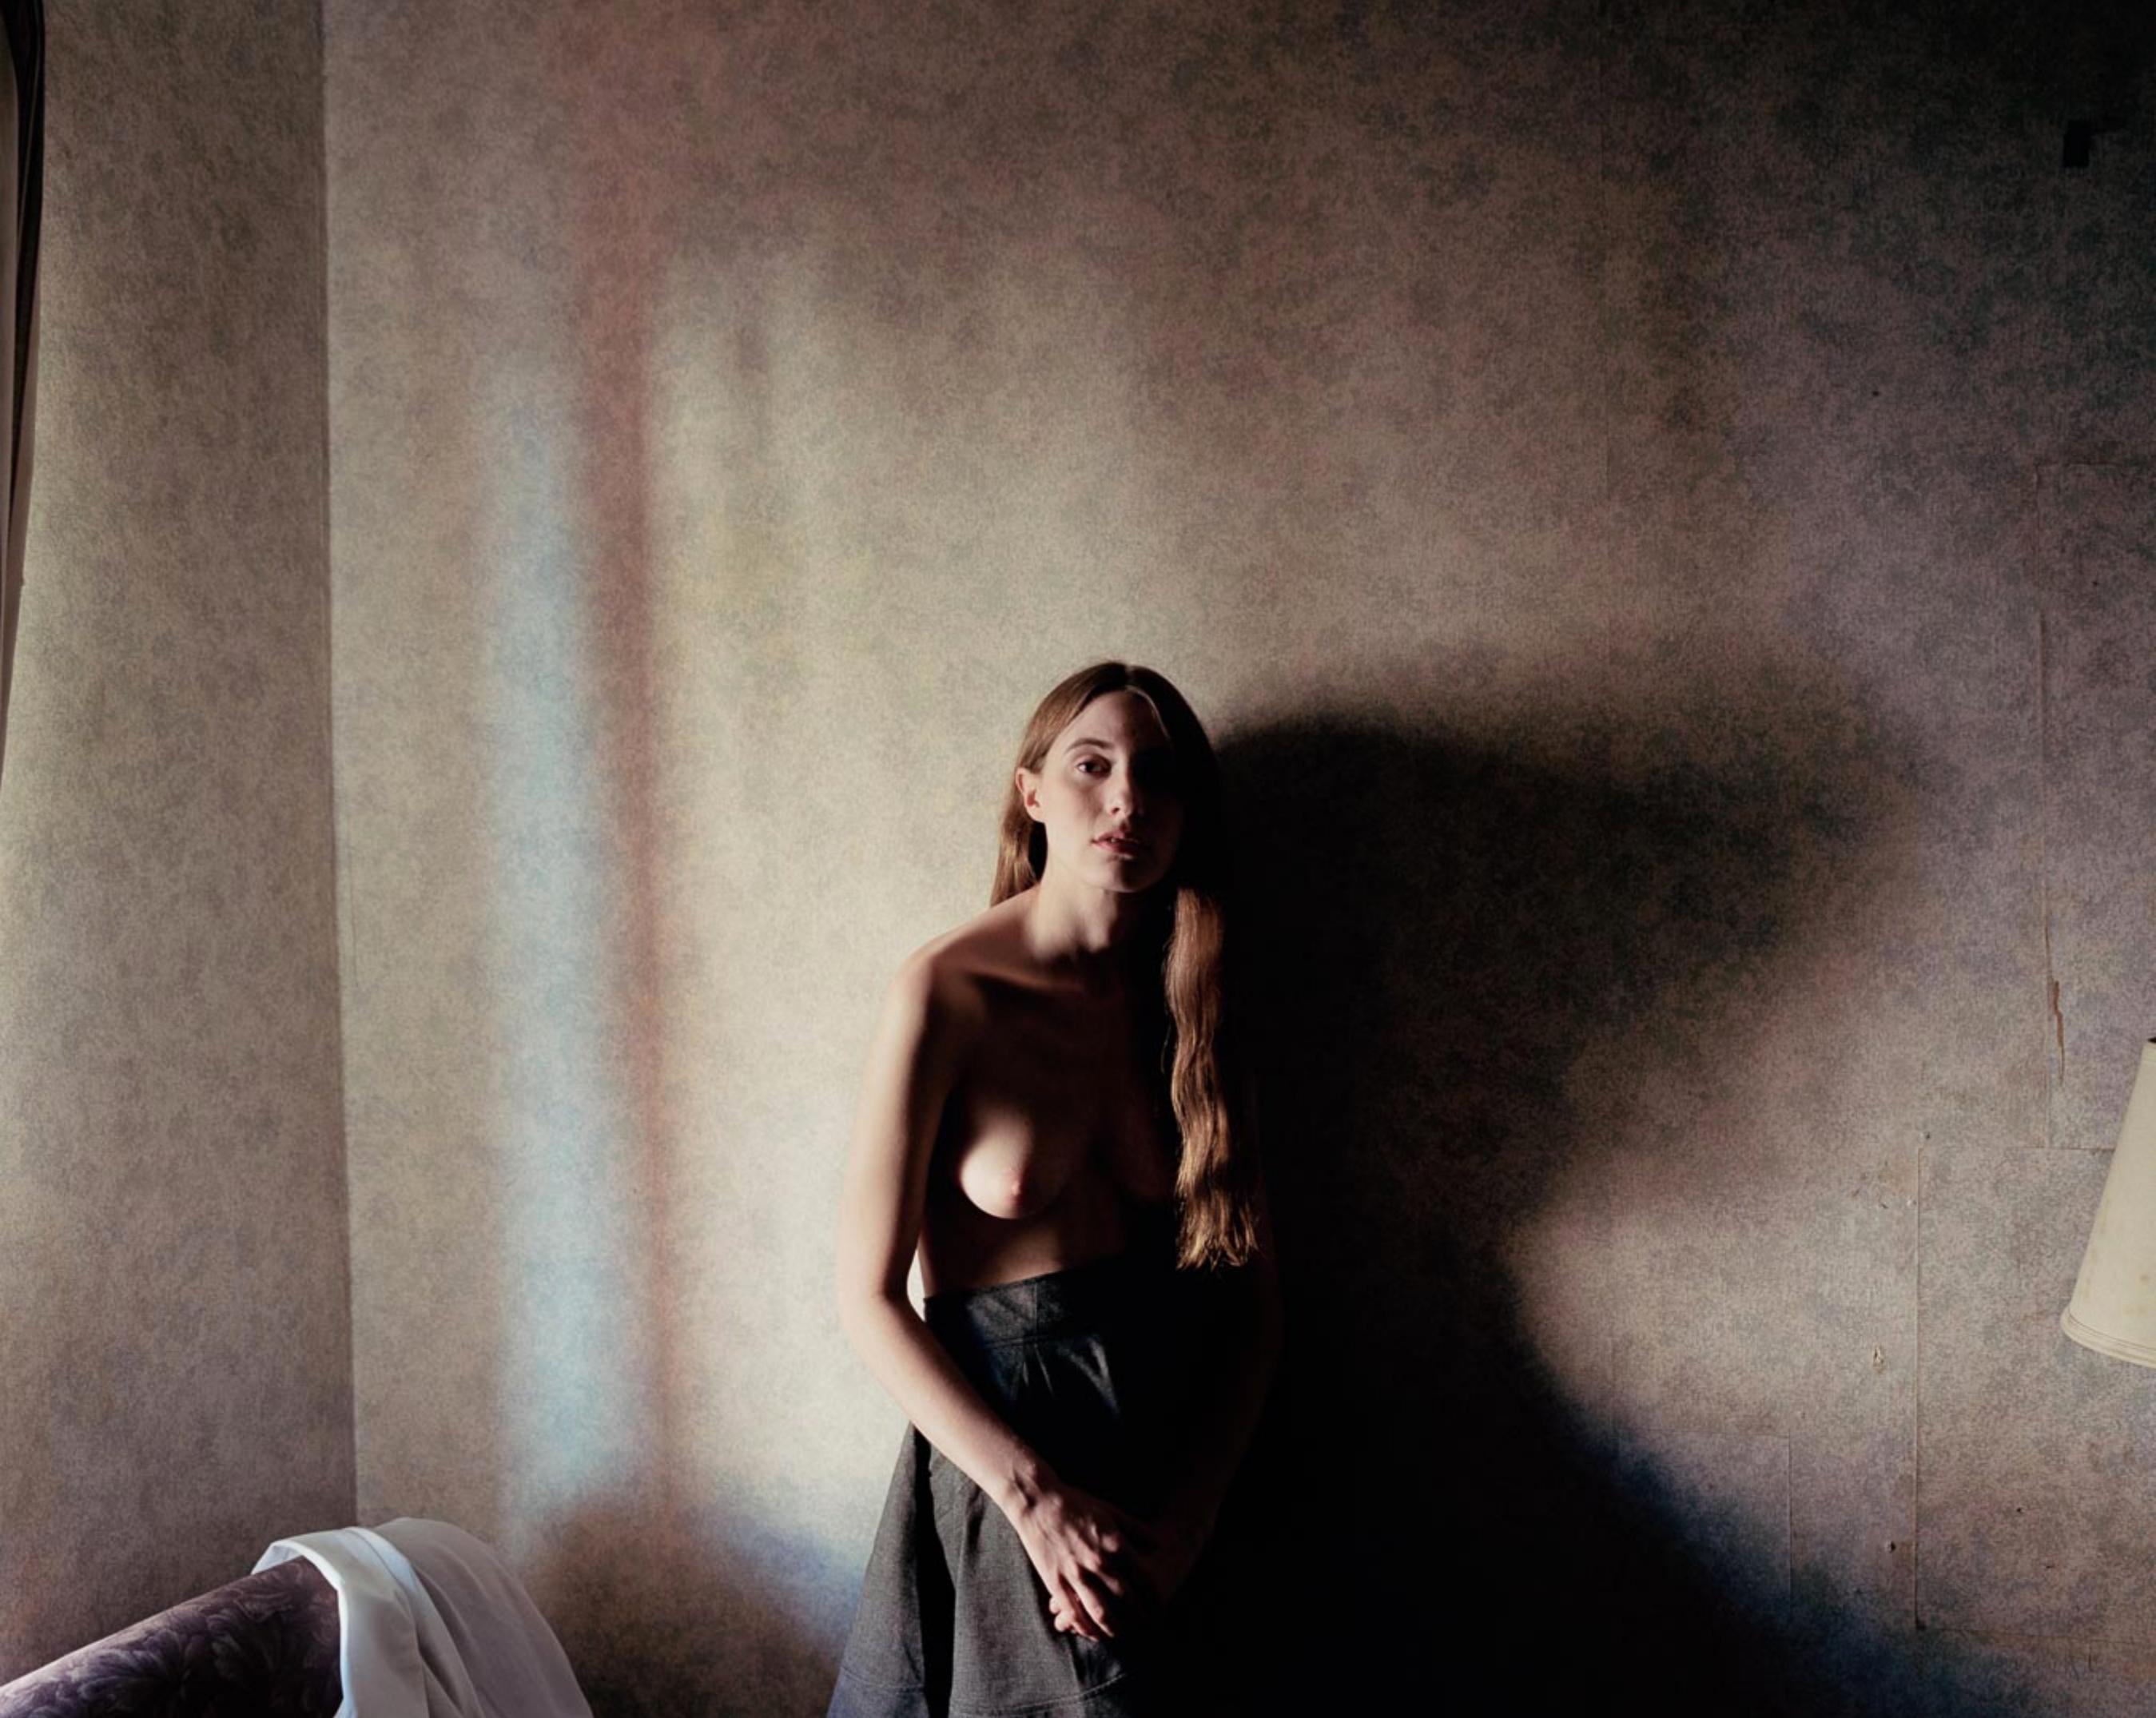 #10625-12, 2011 - Todd Hido (Colour Photography)
Signed, titled and dated on reverse
Archival pigment print

Available in three sizes:
20 x 24 inches, from an edition of 10 + 3 APs
30 x 38 inches, from an edition of 5 + 2 APs
38 x 48 inches, from an